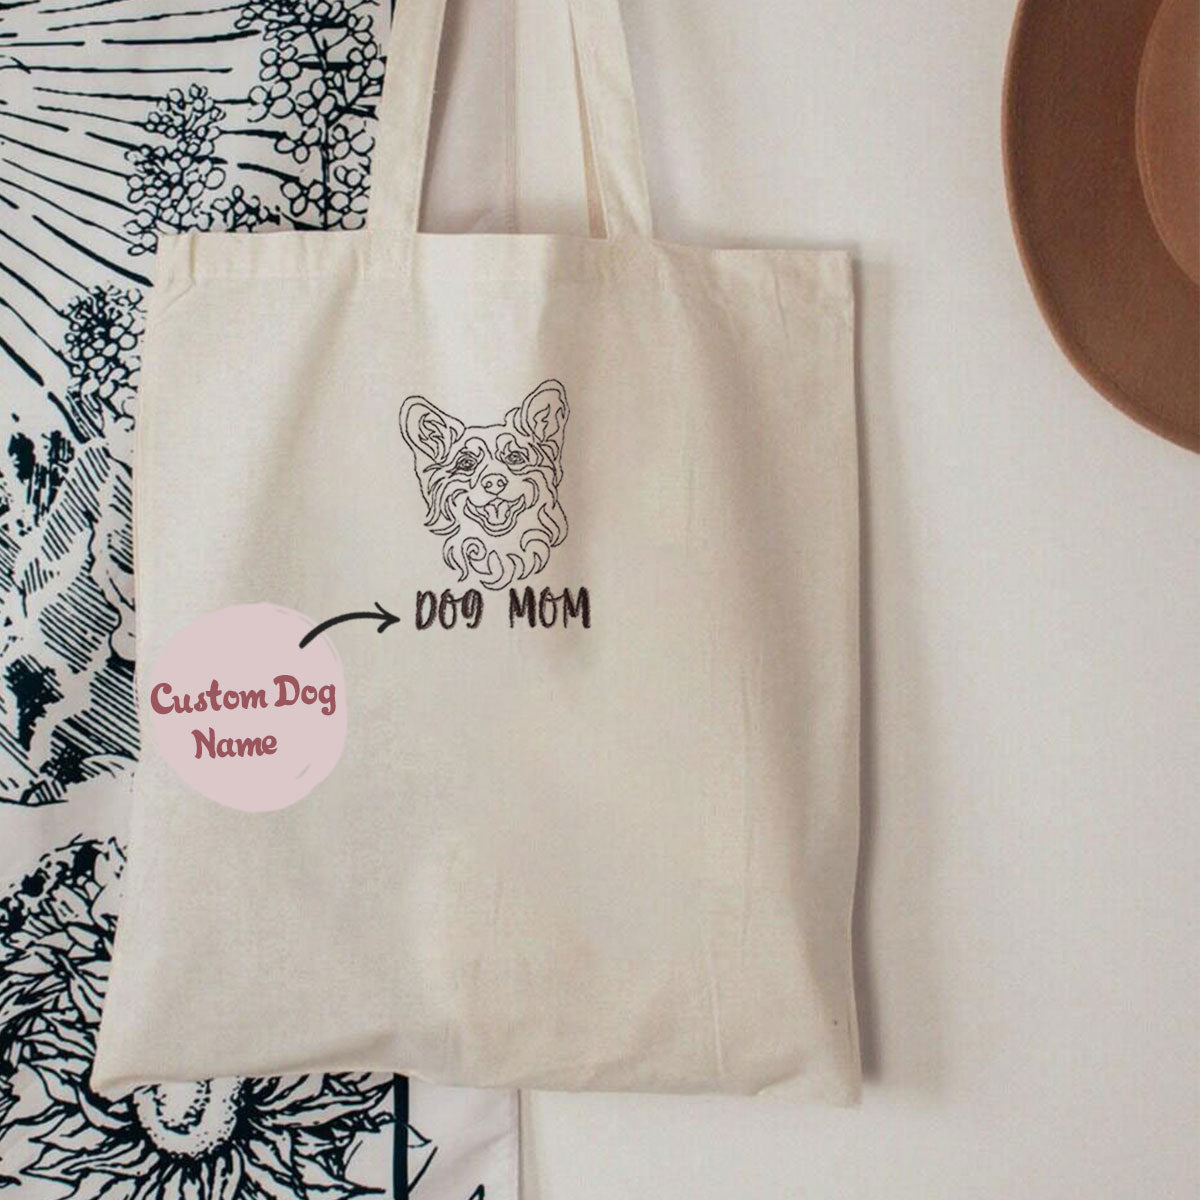 Custom Corgi Dog Mom Embroidered Tote Bag, Personalized Tote Bag with Dog Name, Unique Gifts For Corgi Lovers